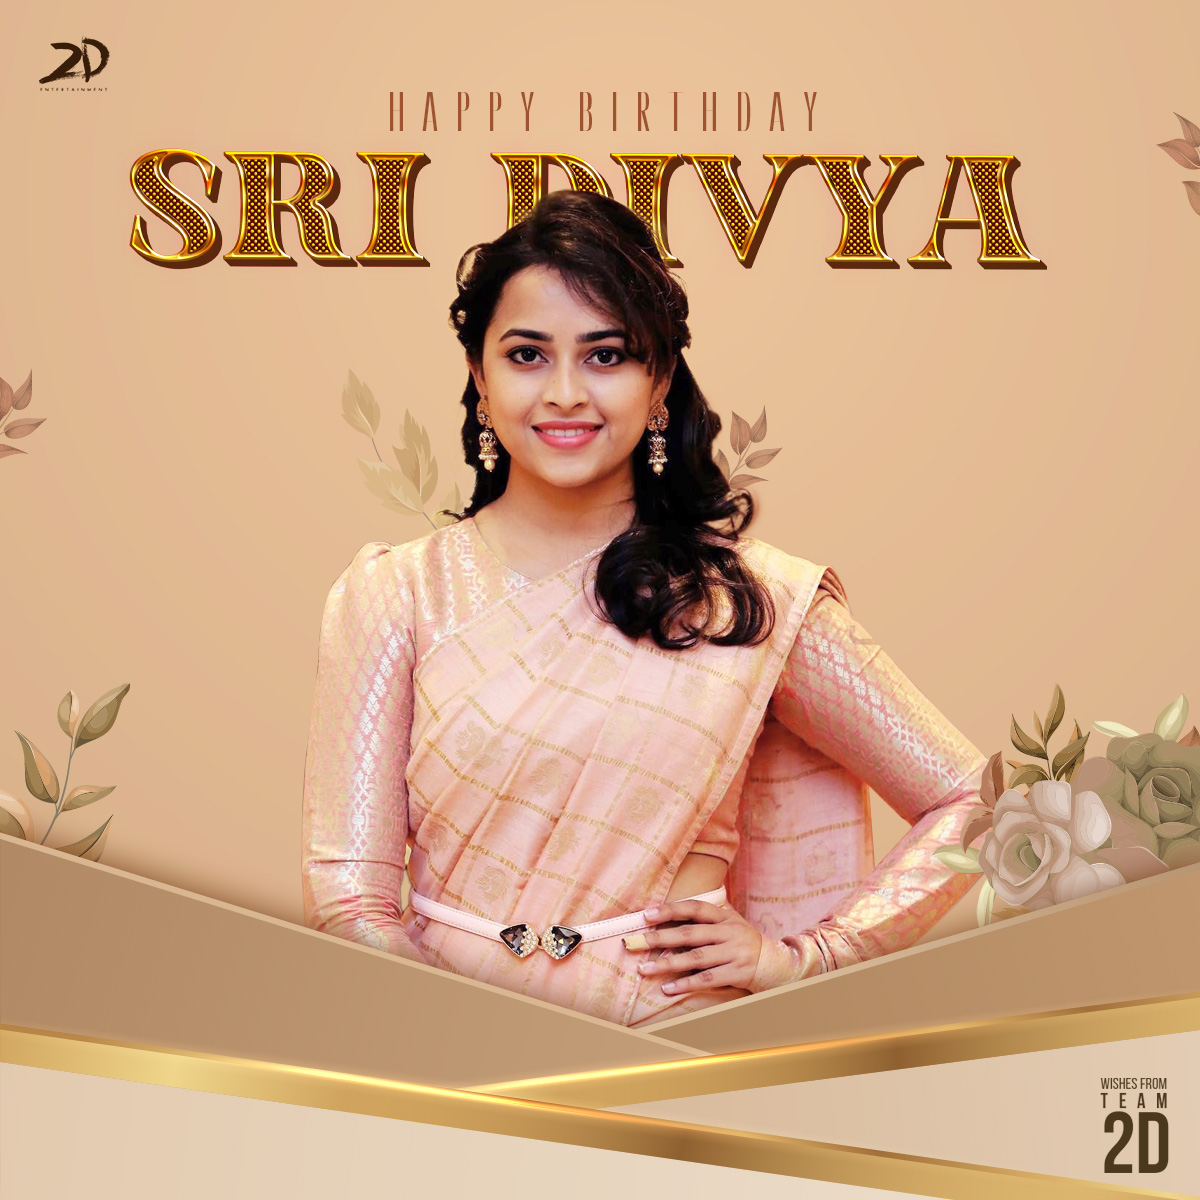 Wishing the lovely and gorgeous @SDsridivya a day filled with laughter, love, and all the happiness in the world💞 #HBDSriDivya